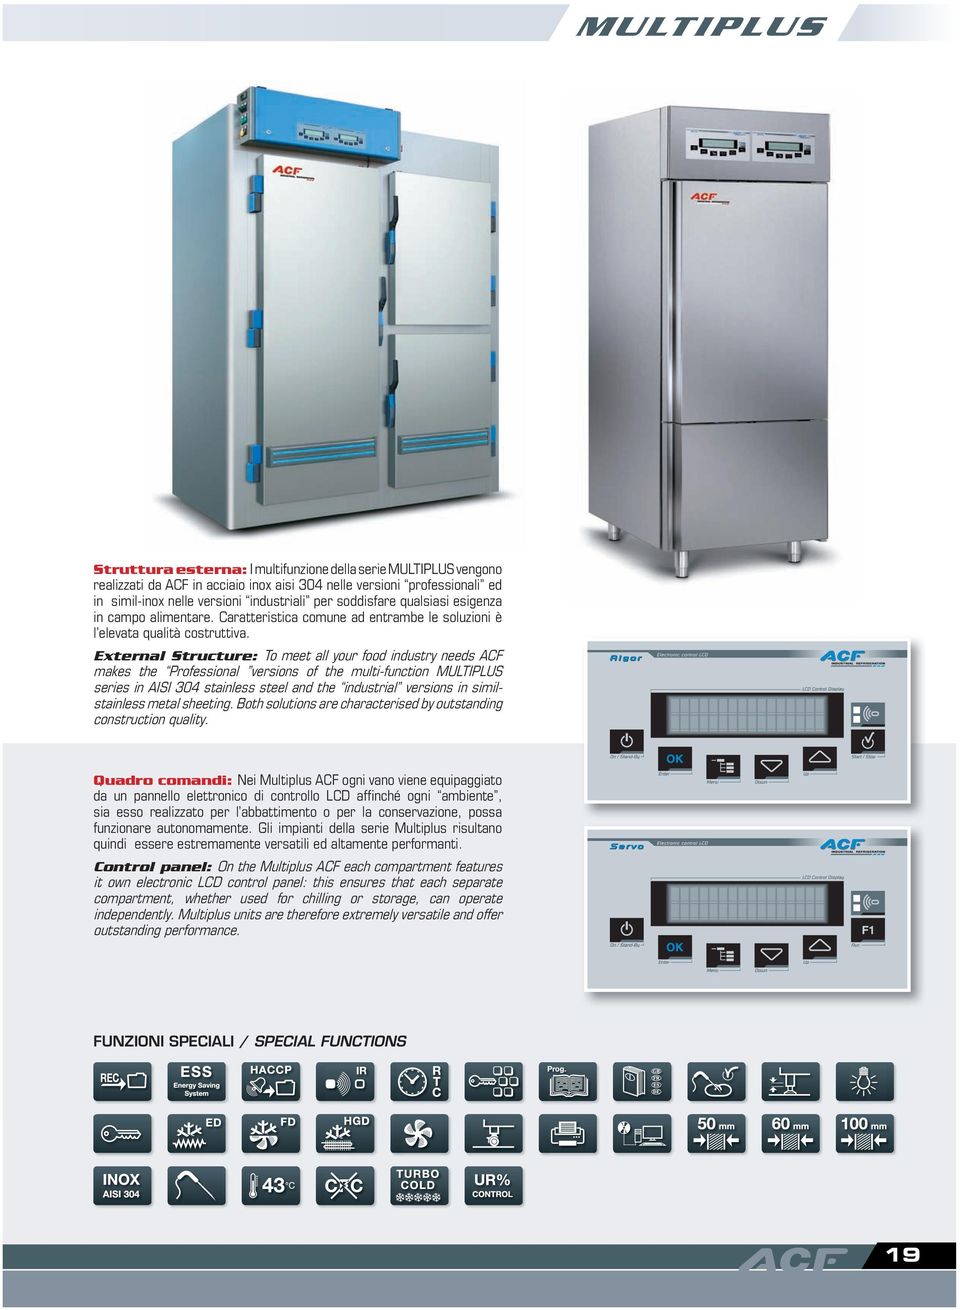 External Structure: To meet all your food industry needs ACF makes the Professional versions of the multi-function MULTIPLUS series in AISI 304 stainless steel and the industrial versions in